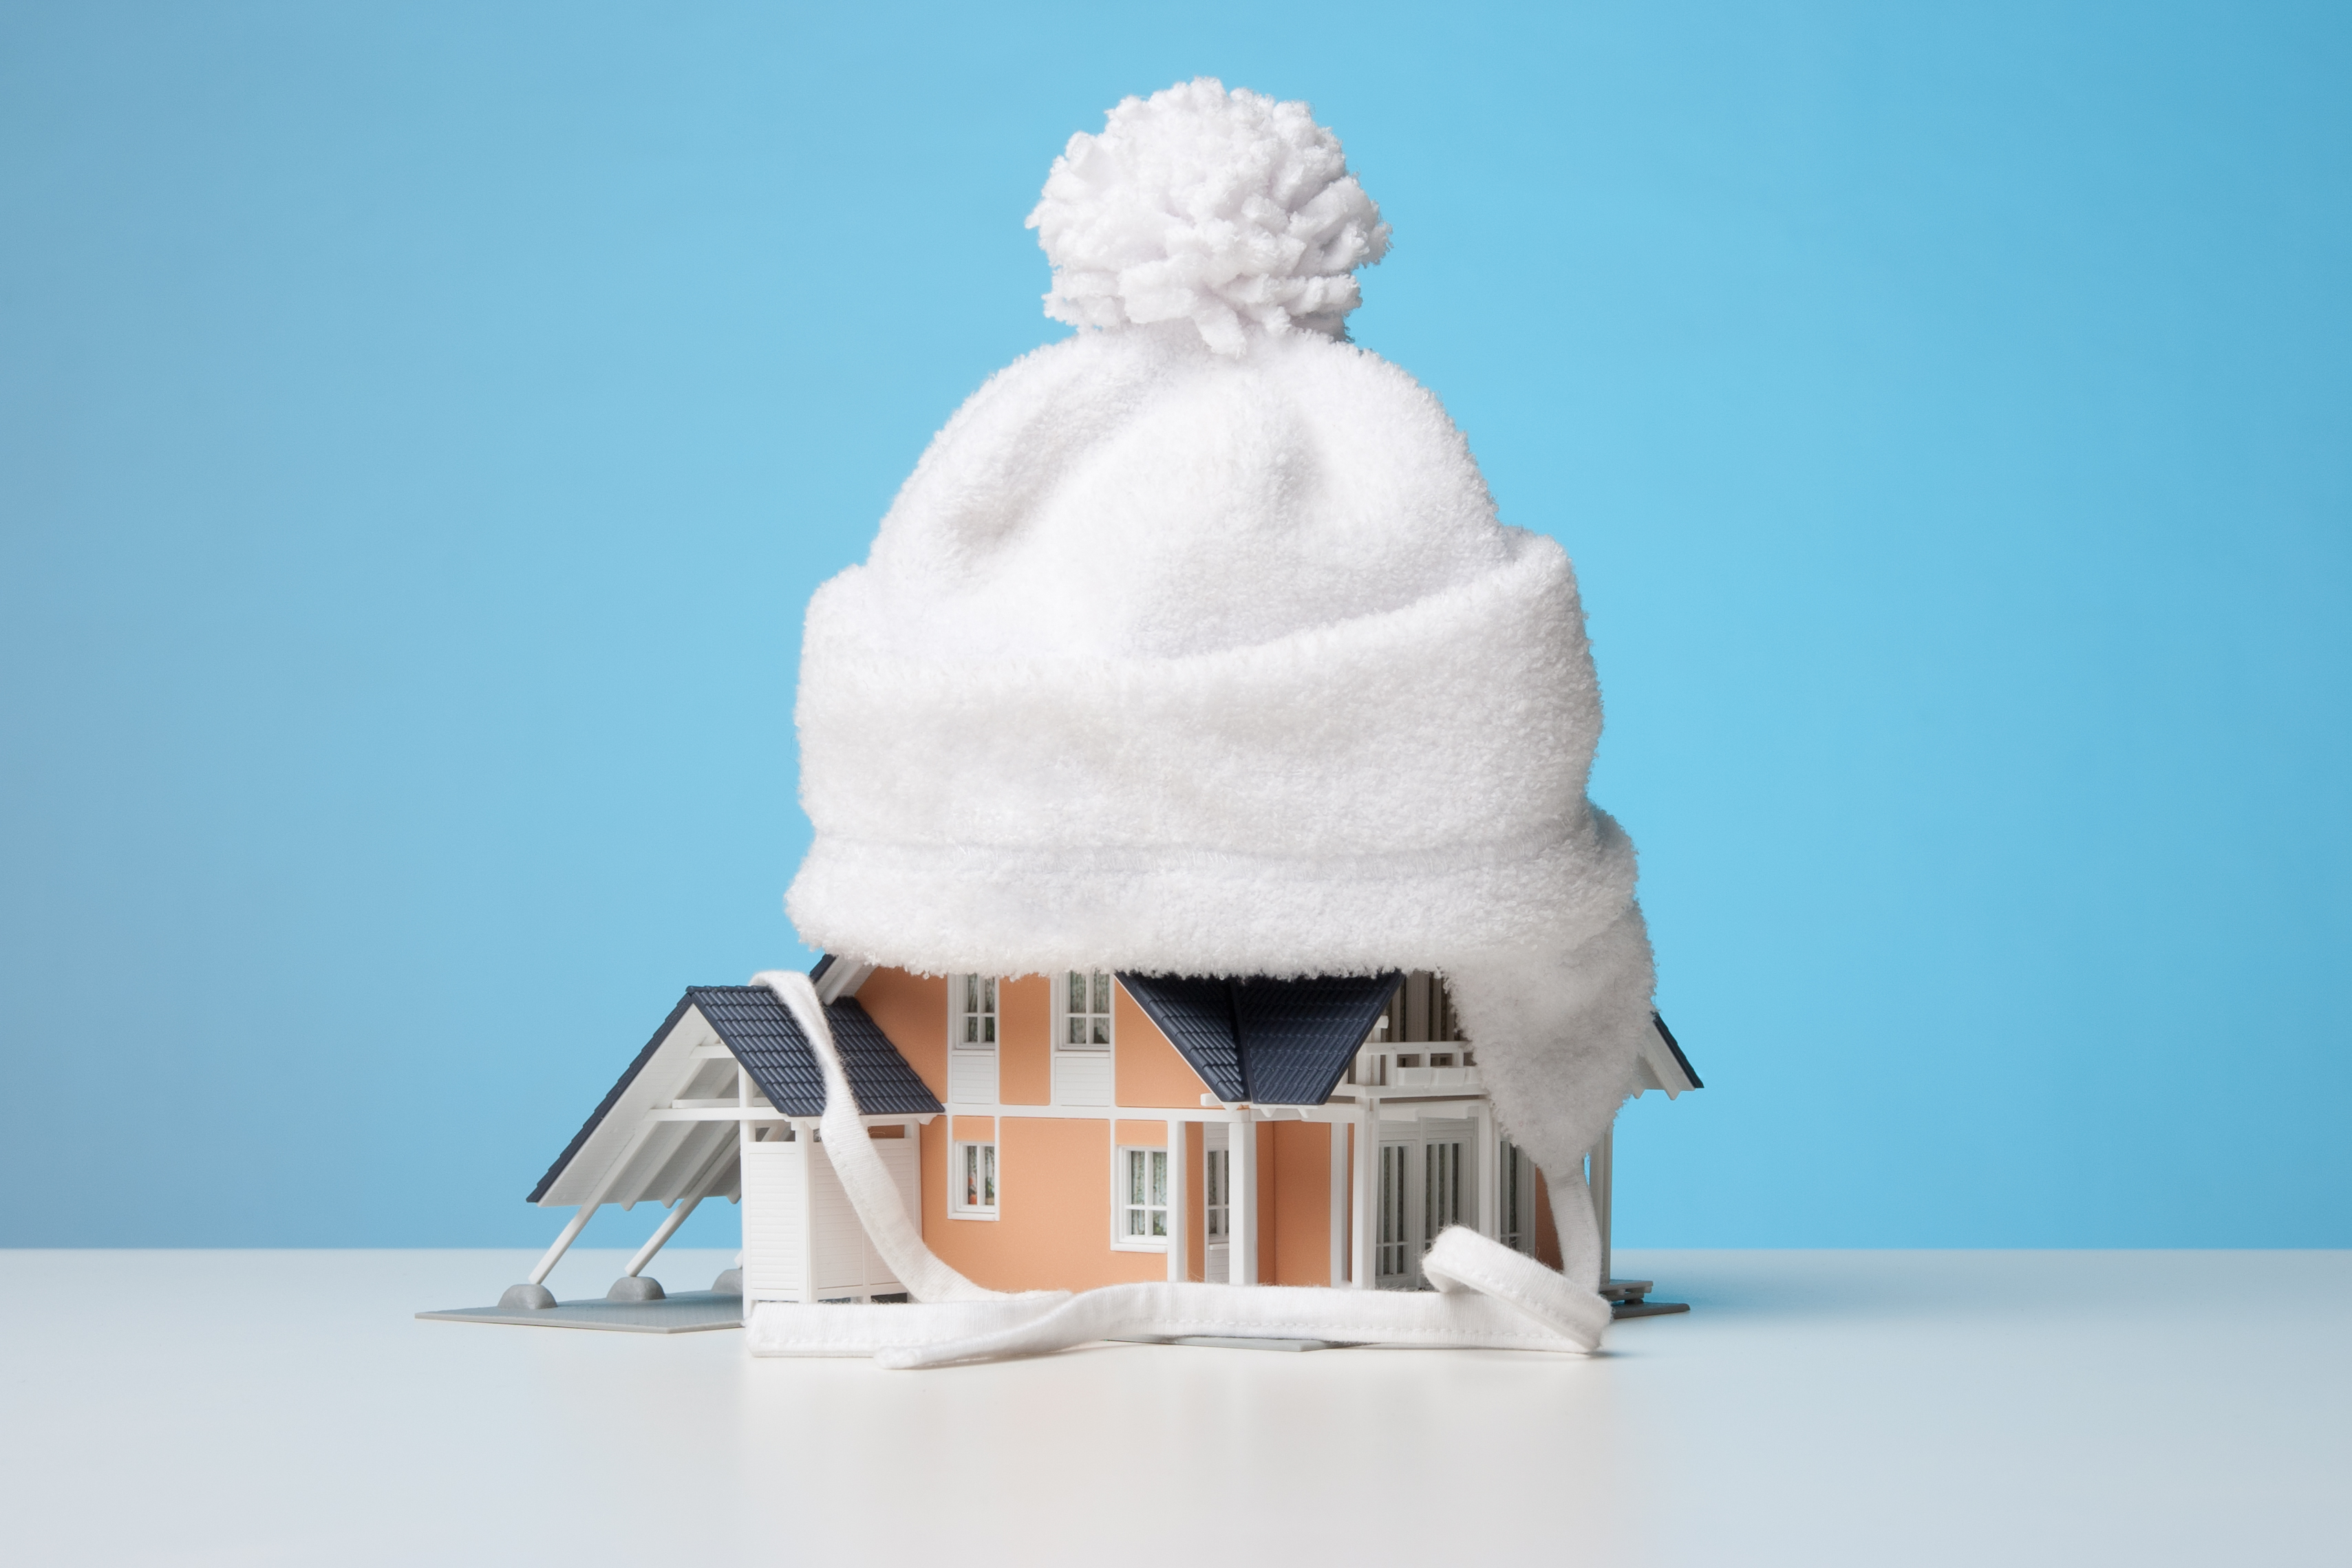  Keep your family cozy and save money! We provide professional attic insulation solutions to clients in Colorado.